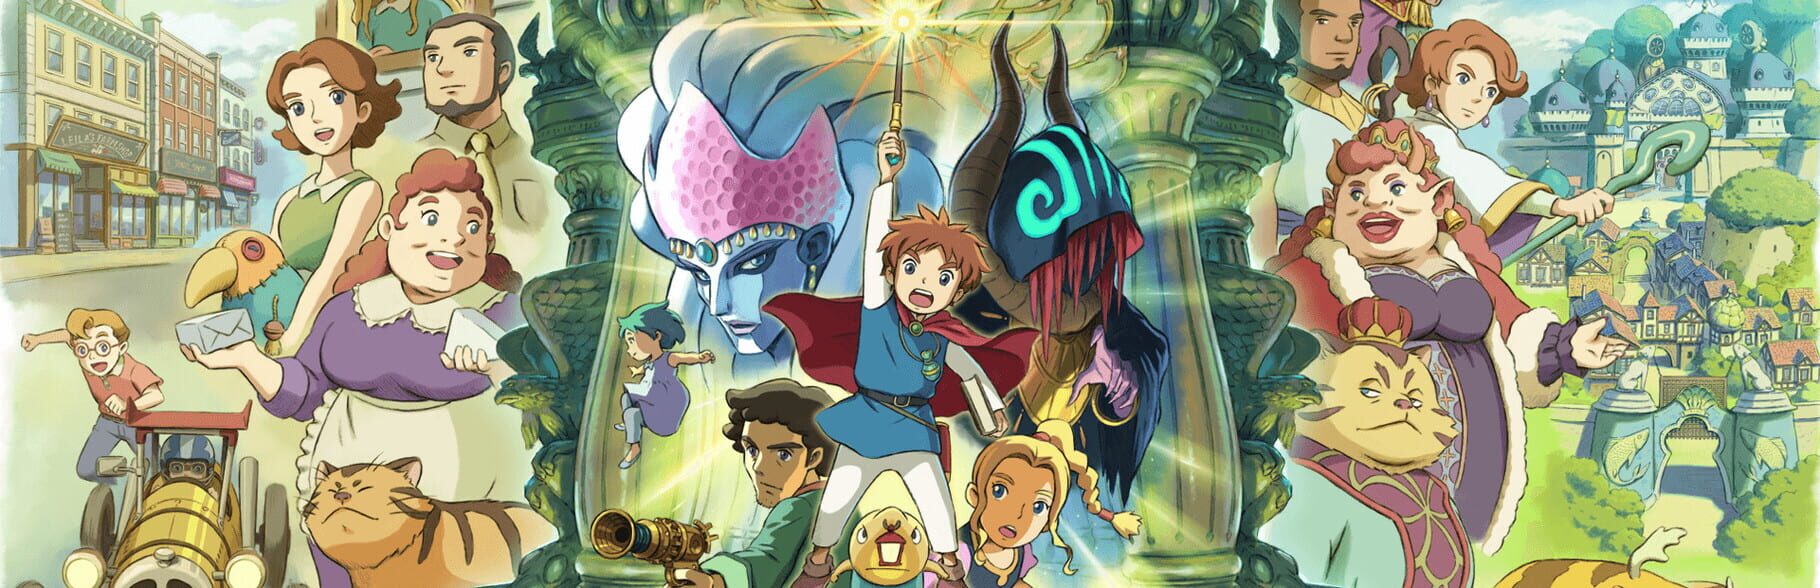 Artwork for Ni no Kuni: Wrath of the White Witch Remastered